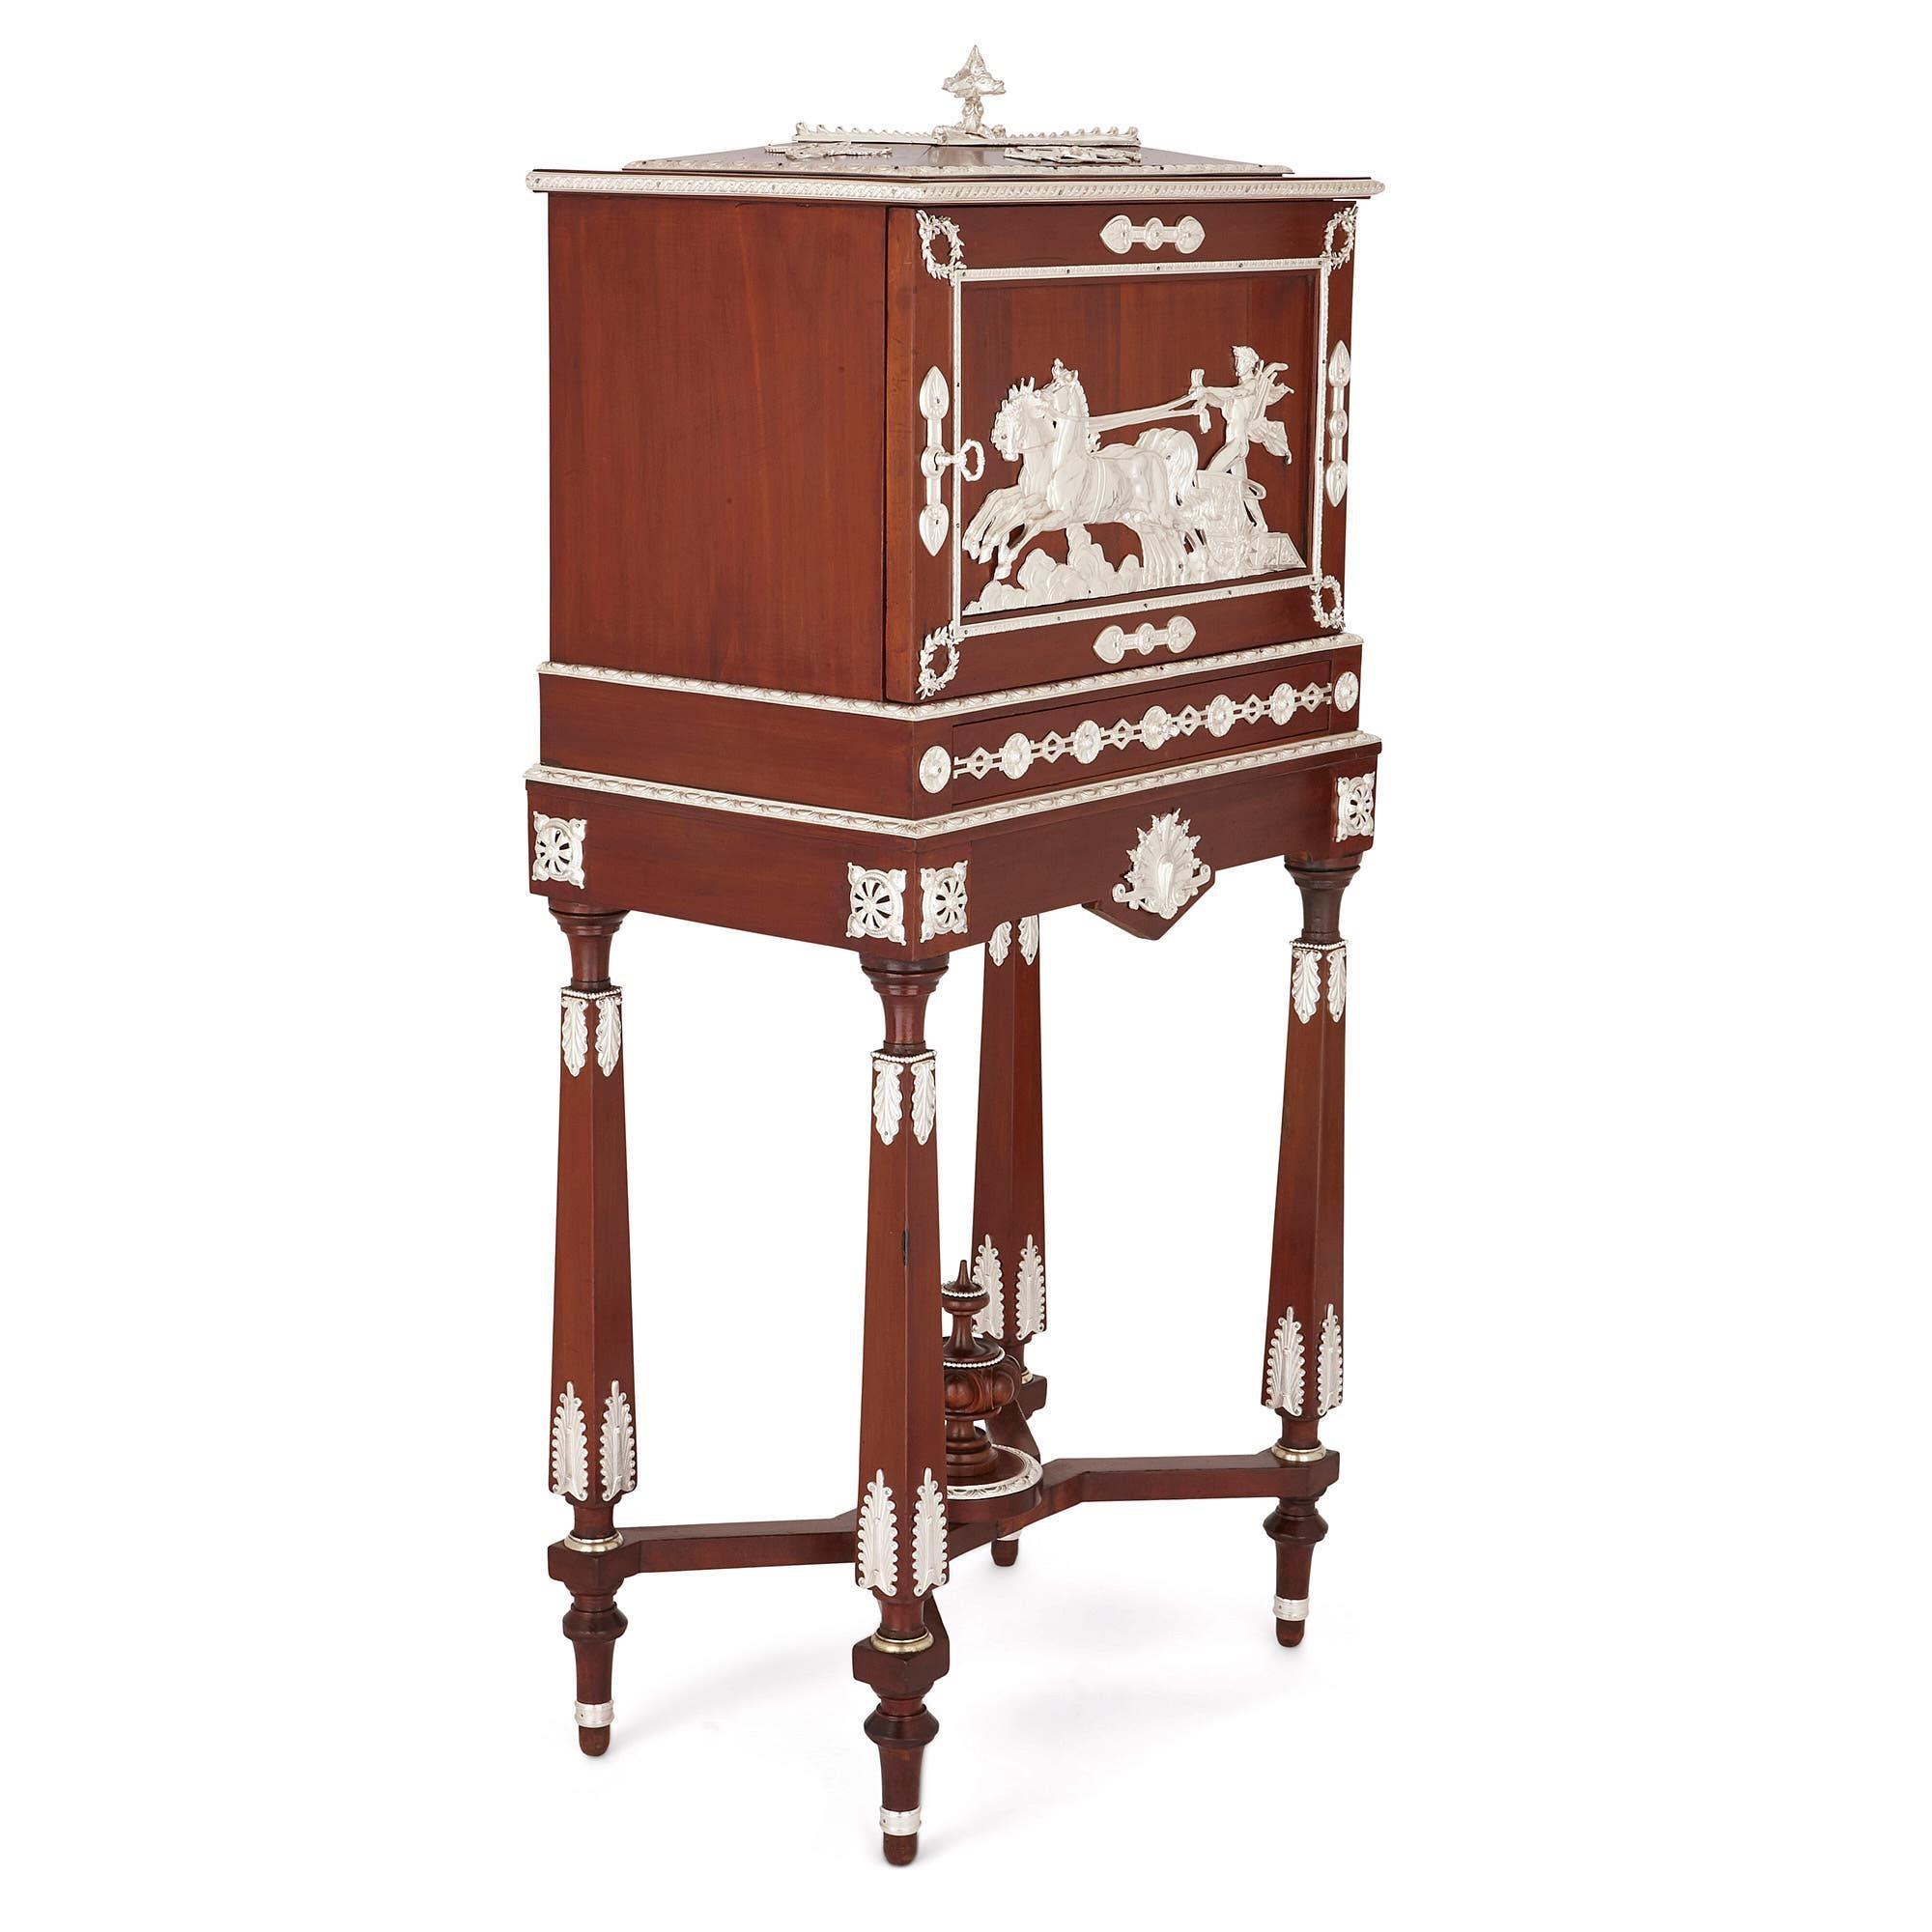 Crafted by the acclaimed cabinetmaker, Charles-Guillaume Diehl (1811-1885), this tobacco (humidor) cabinet is a truly exquisite piece of antique oak furniture. Diehl was famous in the 19th century for his furniture, which was often decorated with